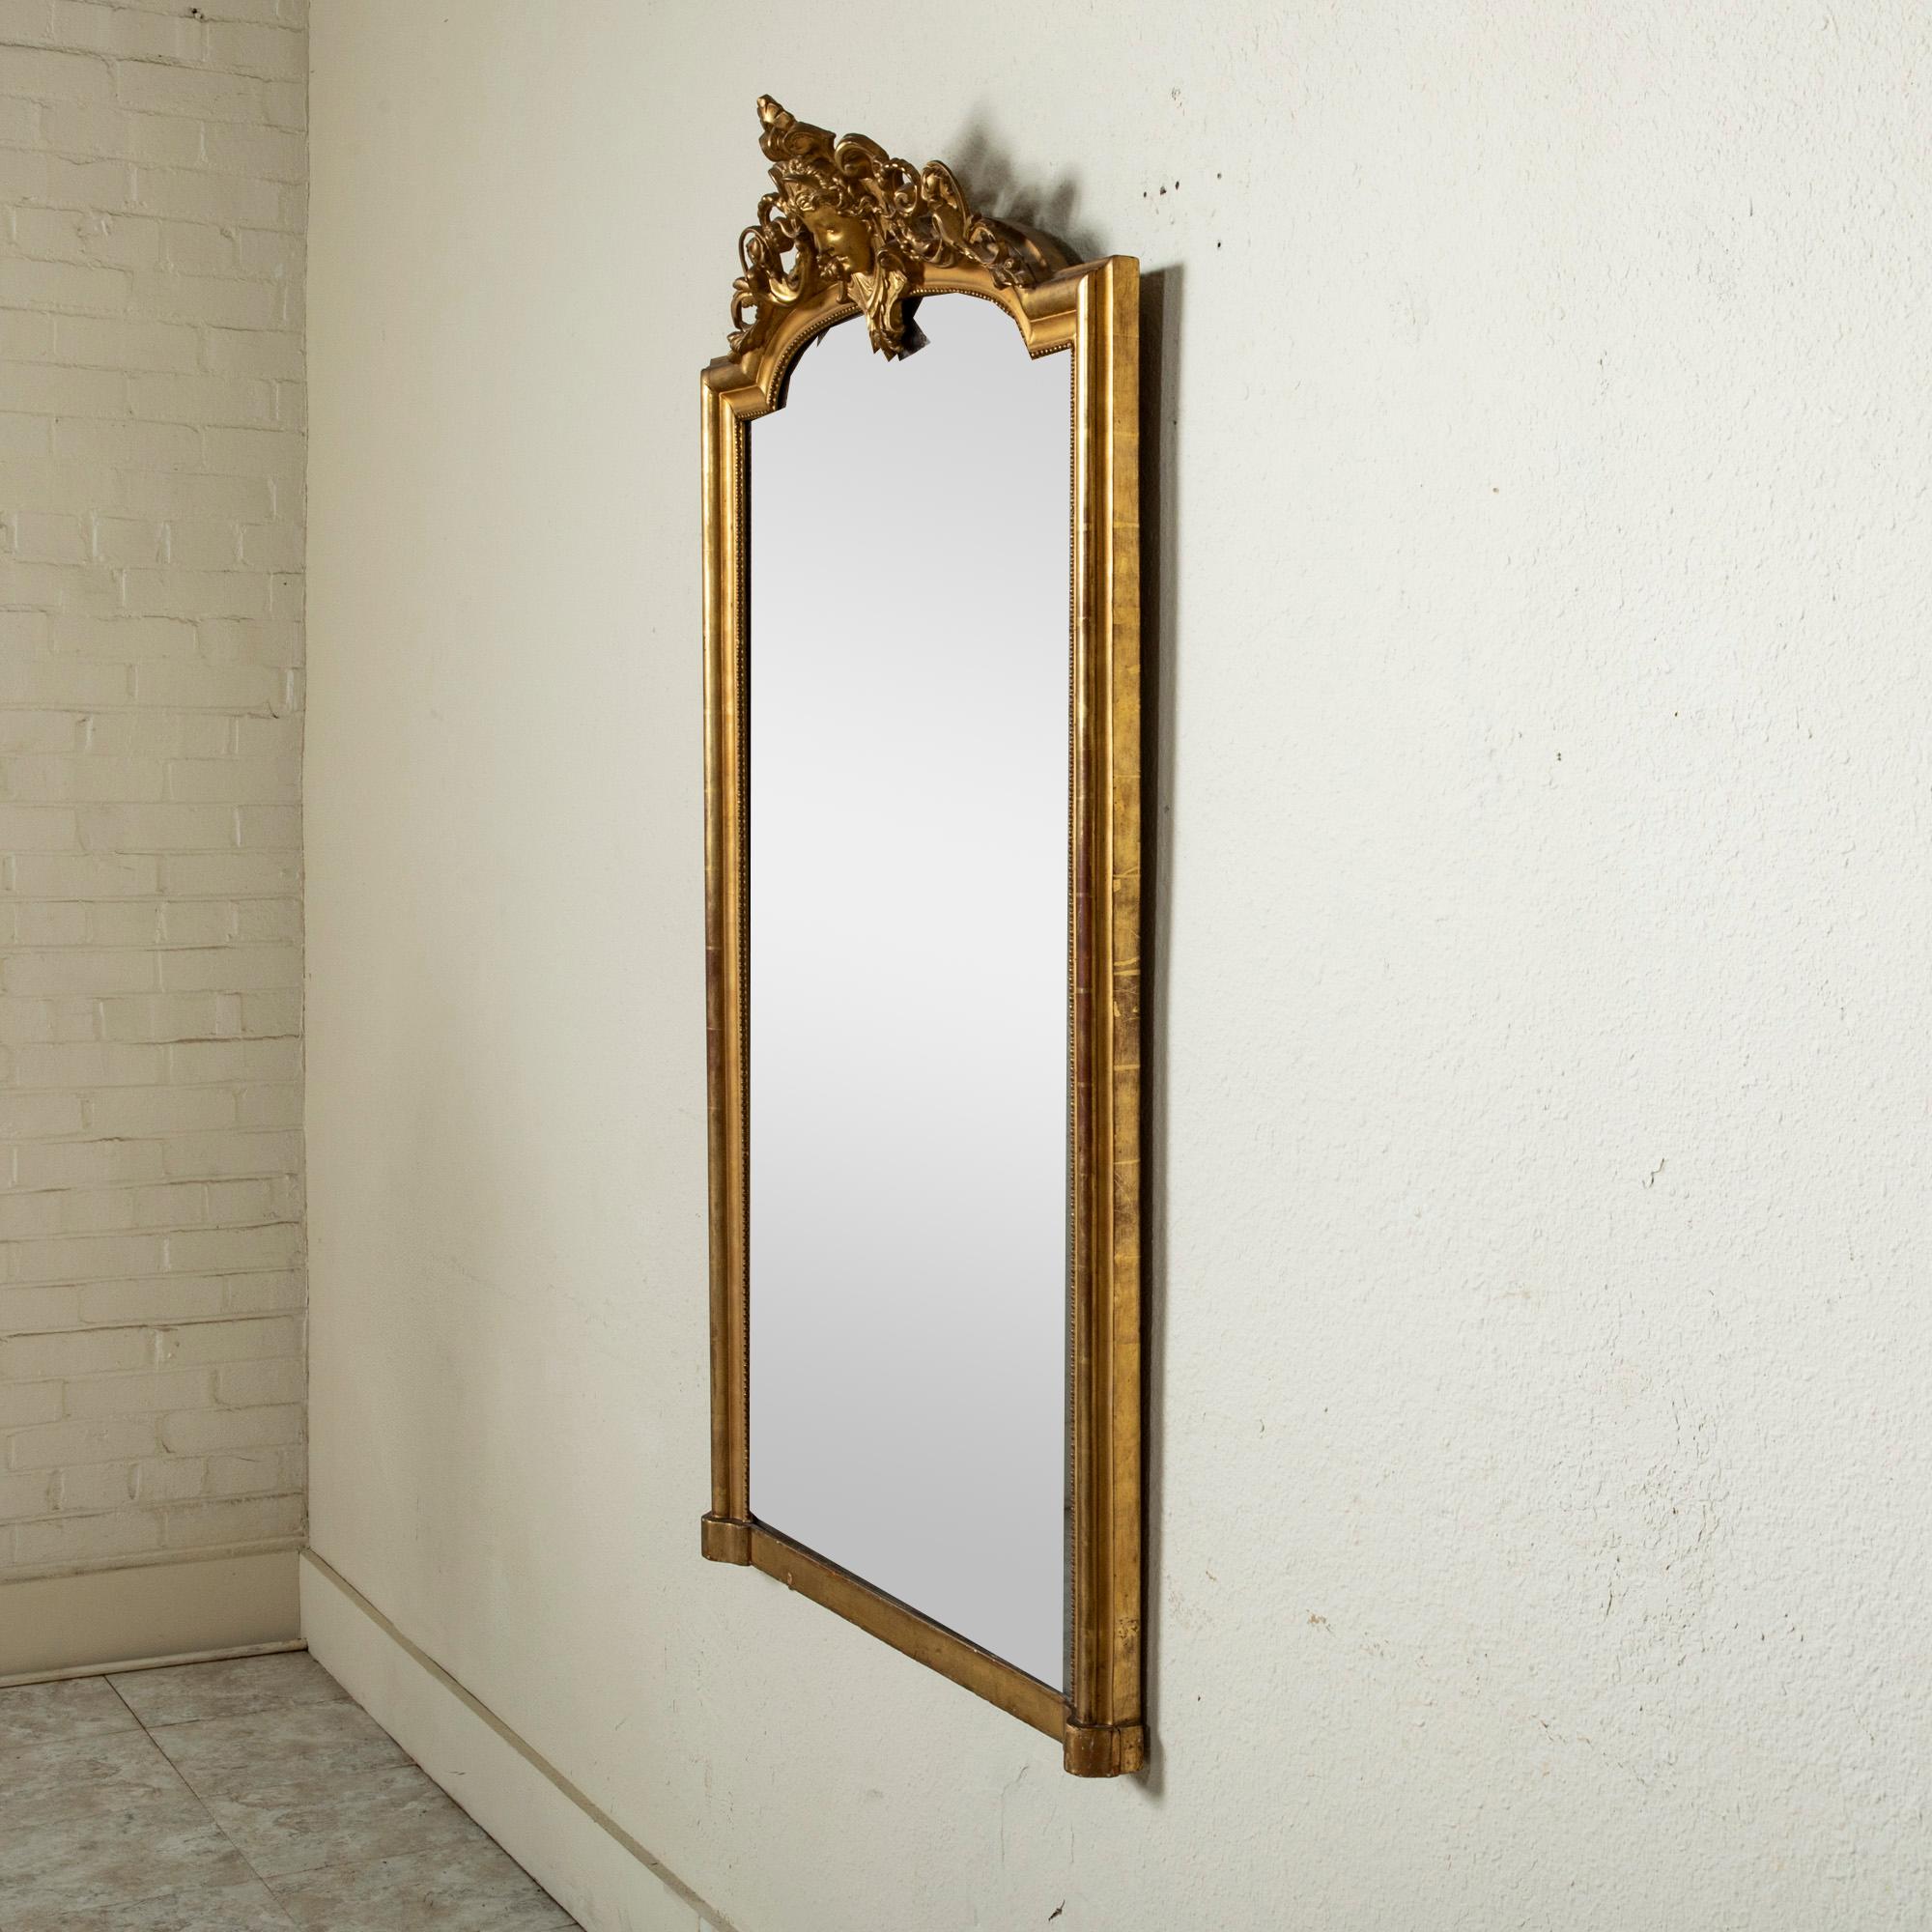 Mercury Glass Mid-19th Century Napoleon III Period French Gilt Wood Mantel Mirror with Mask For Sale